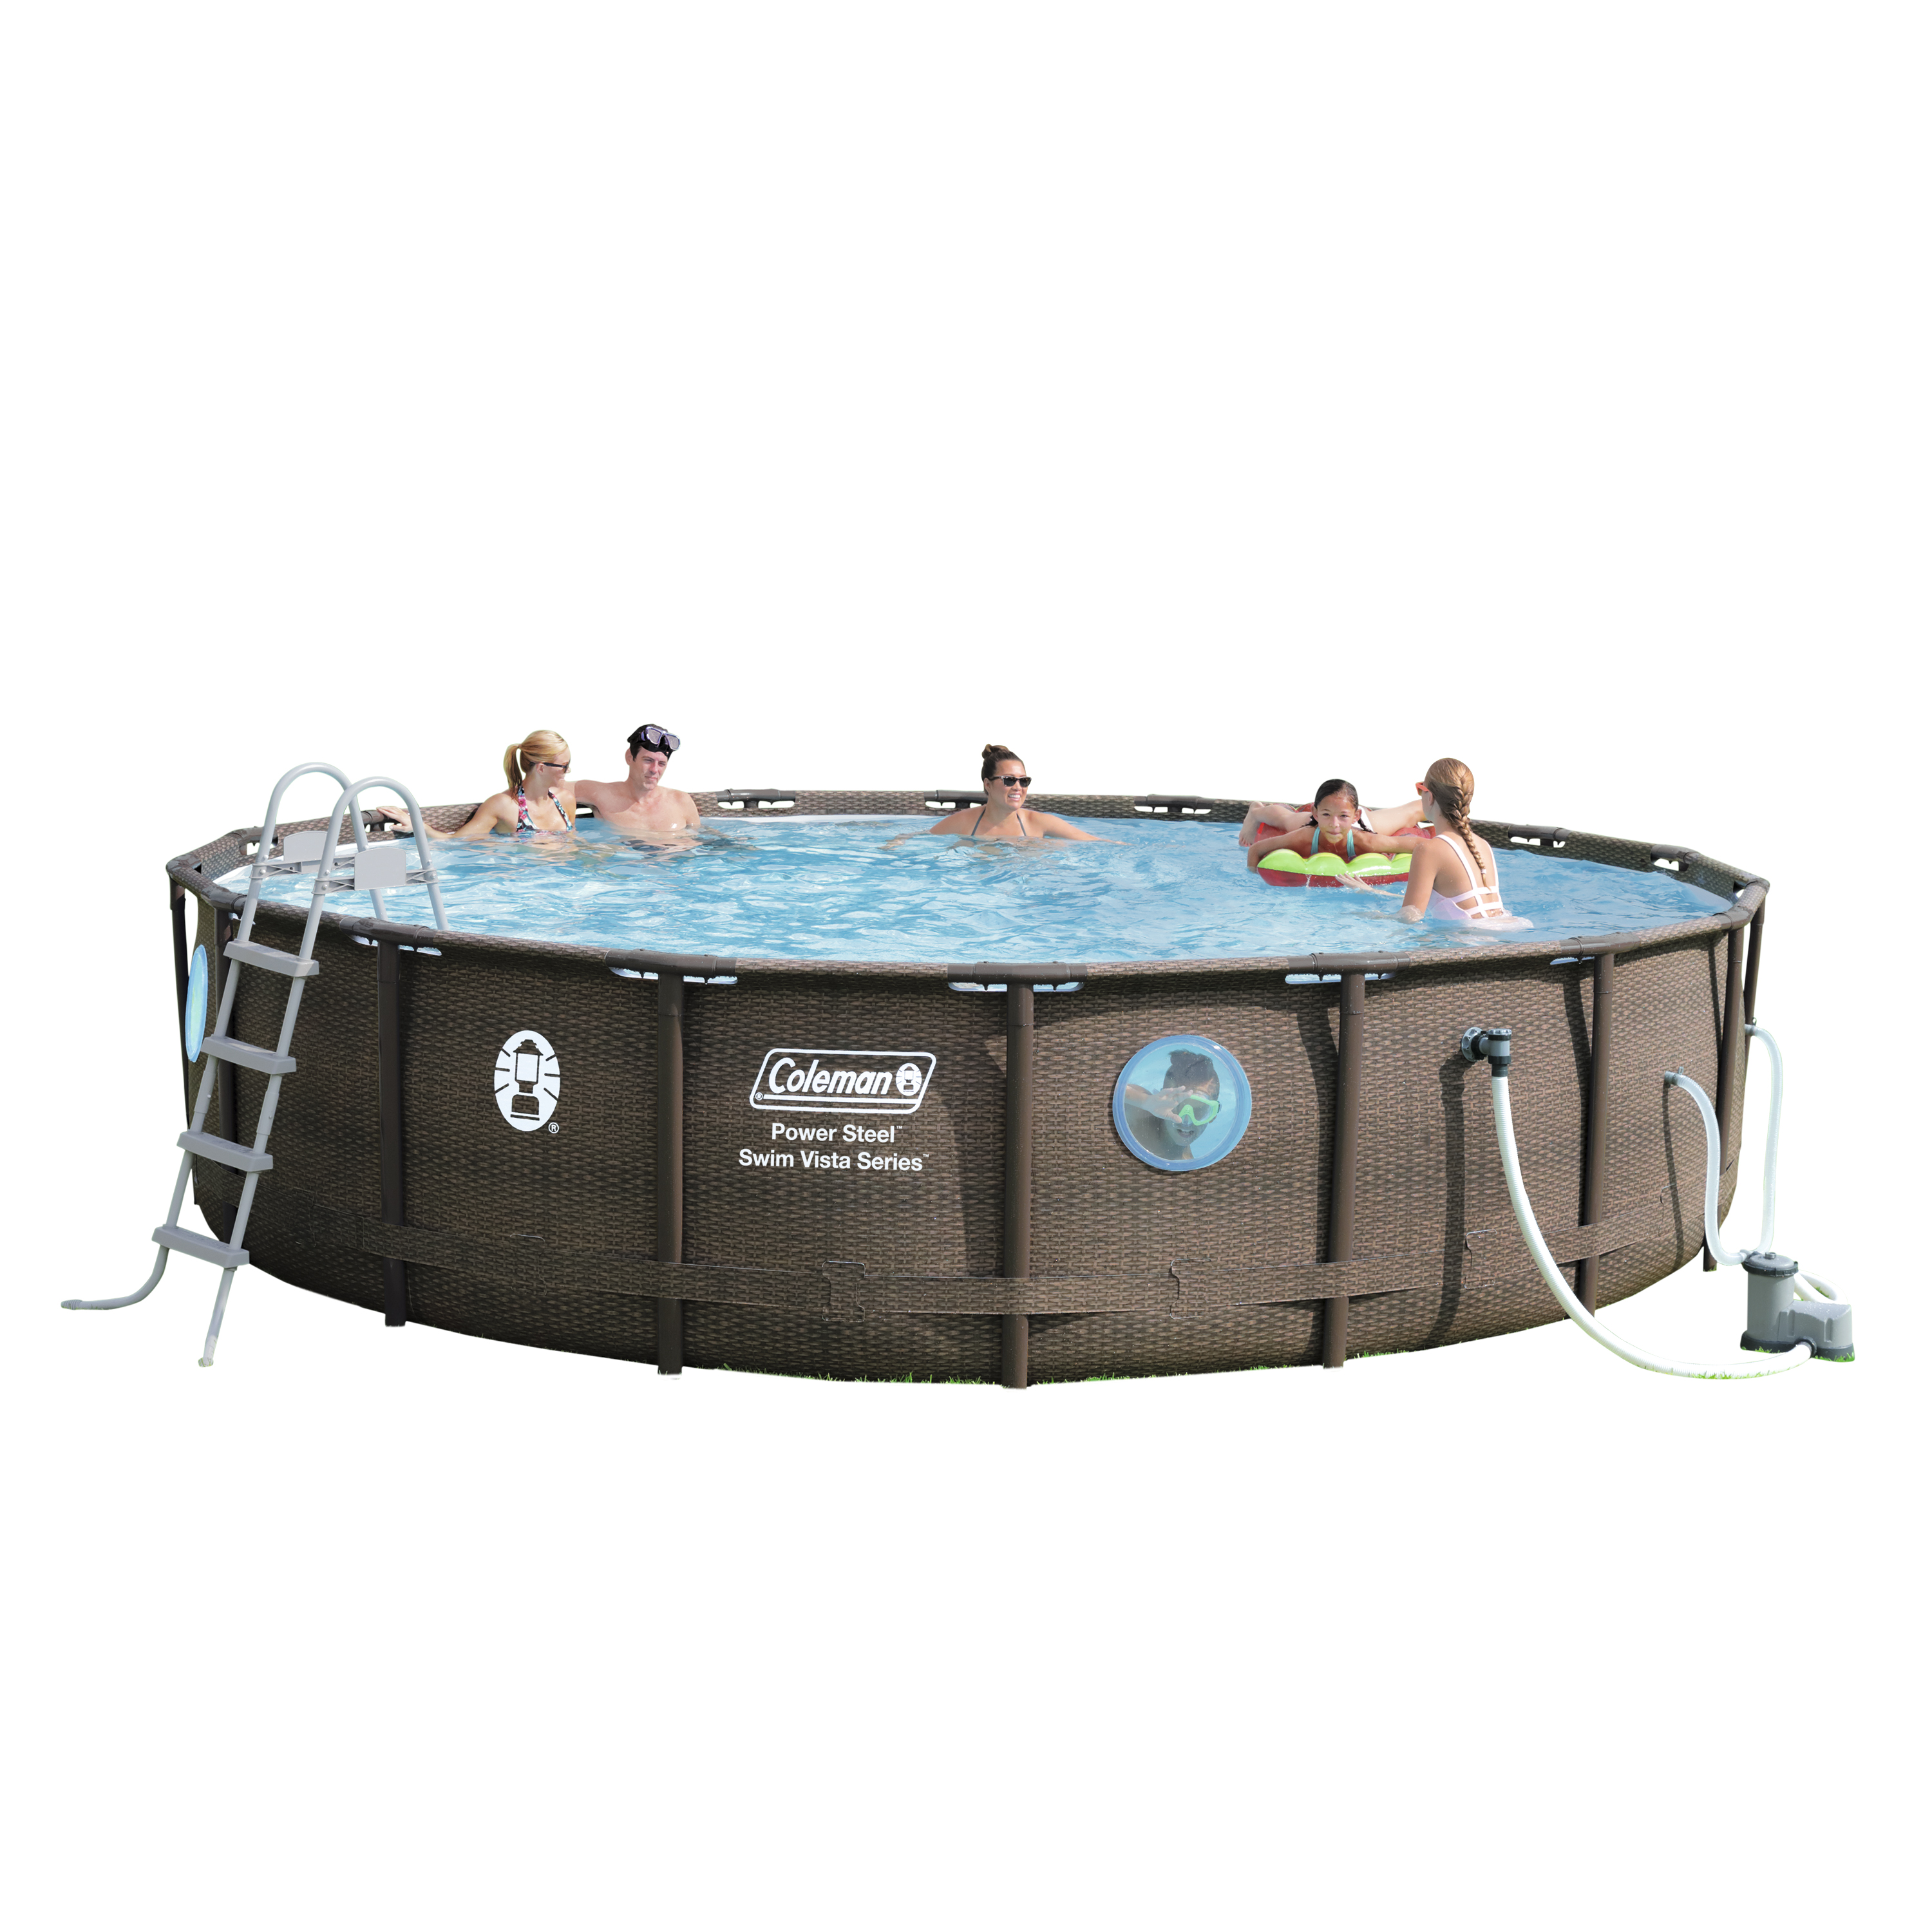 YMMV  Coleman Power Steel Swim Vista Series II 18' x 48;" Frame Swimming Pool Set with Pump, Ladder and Cover $99